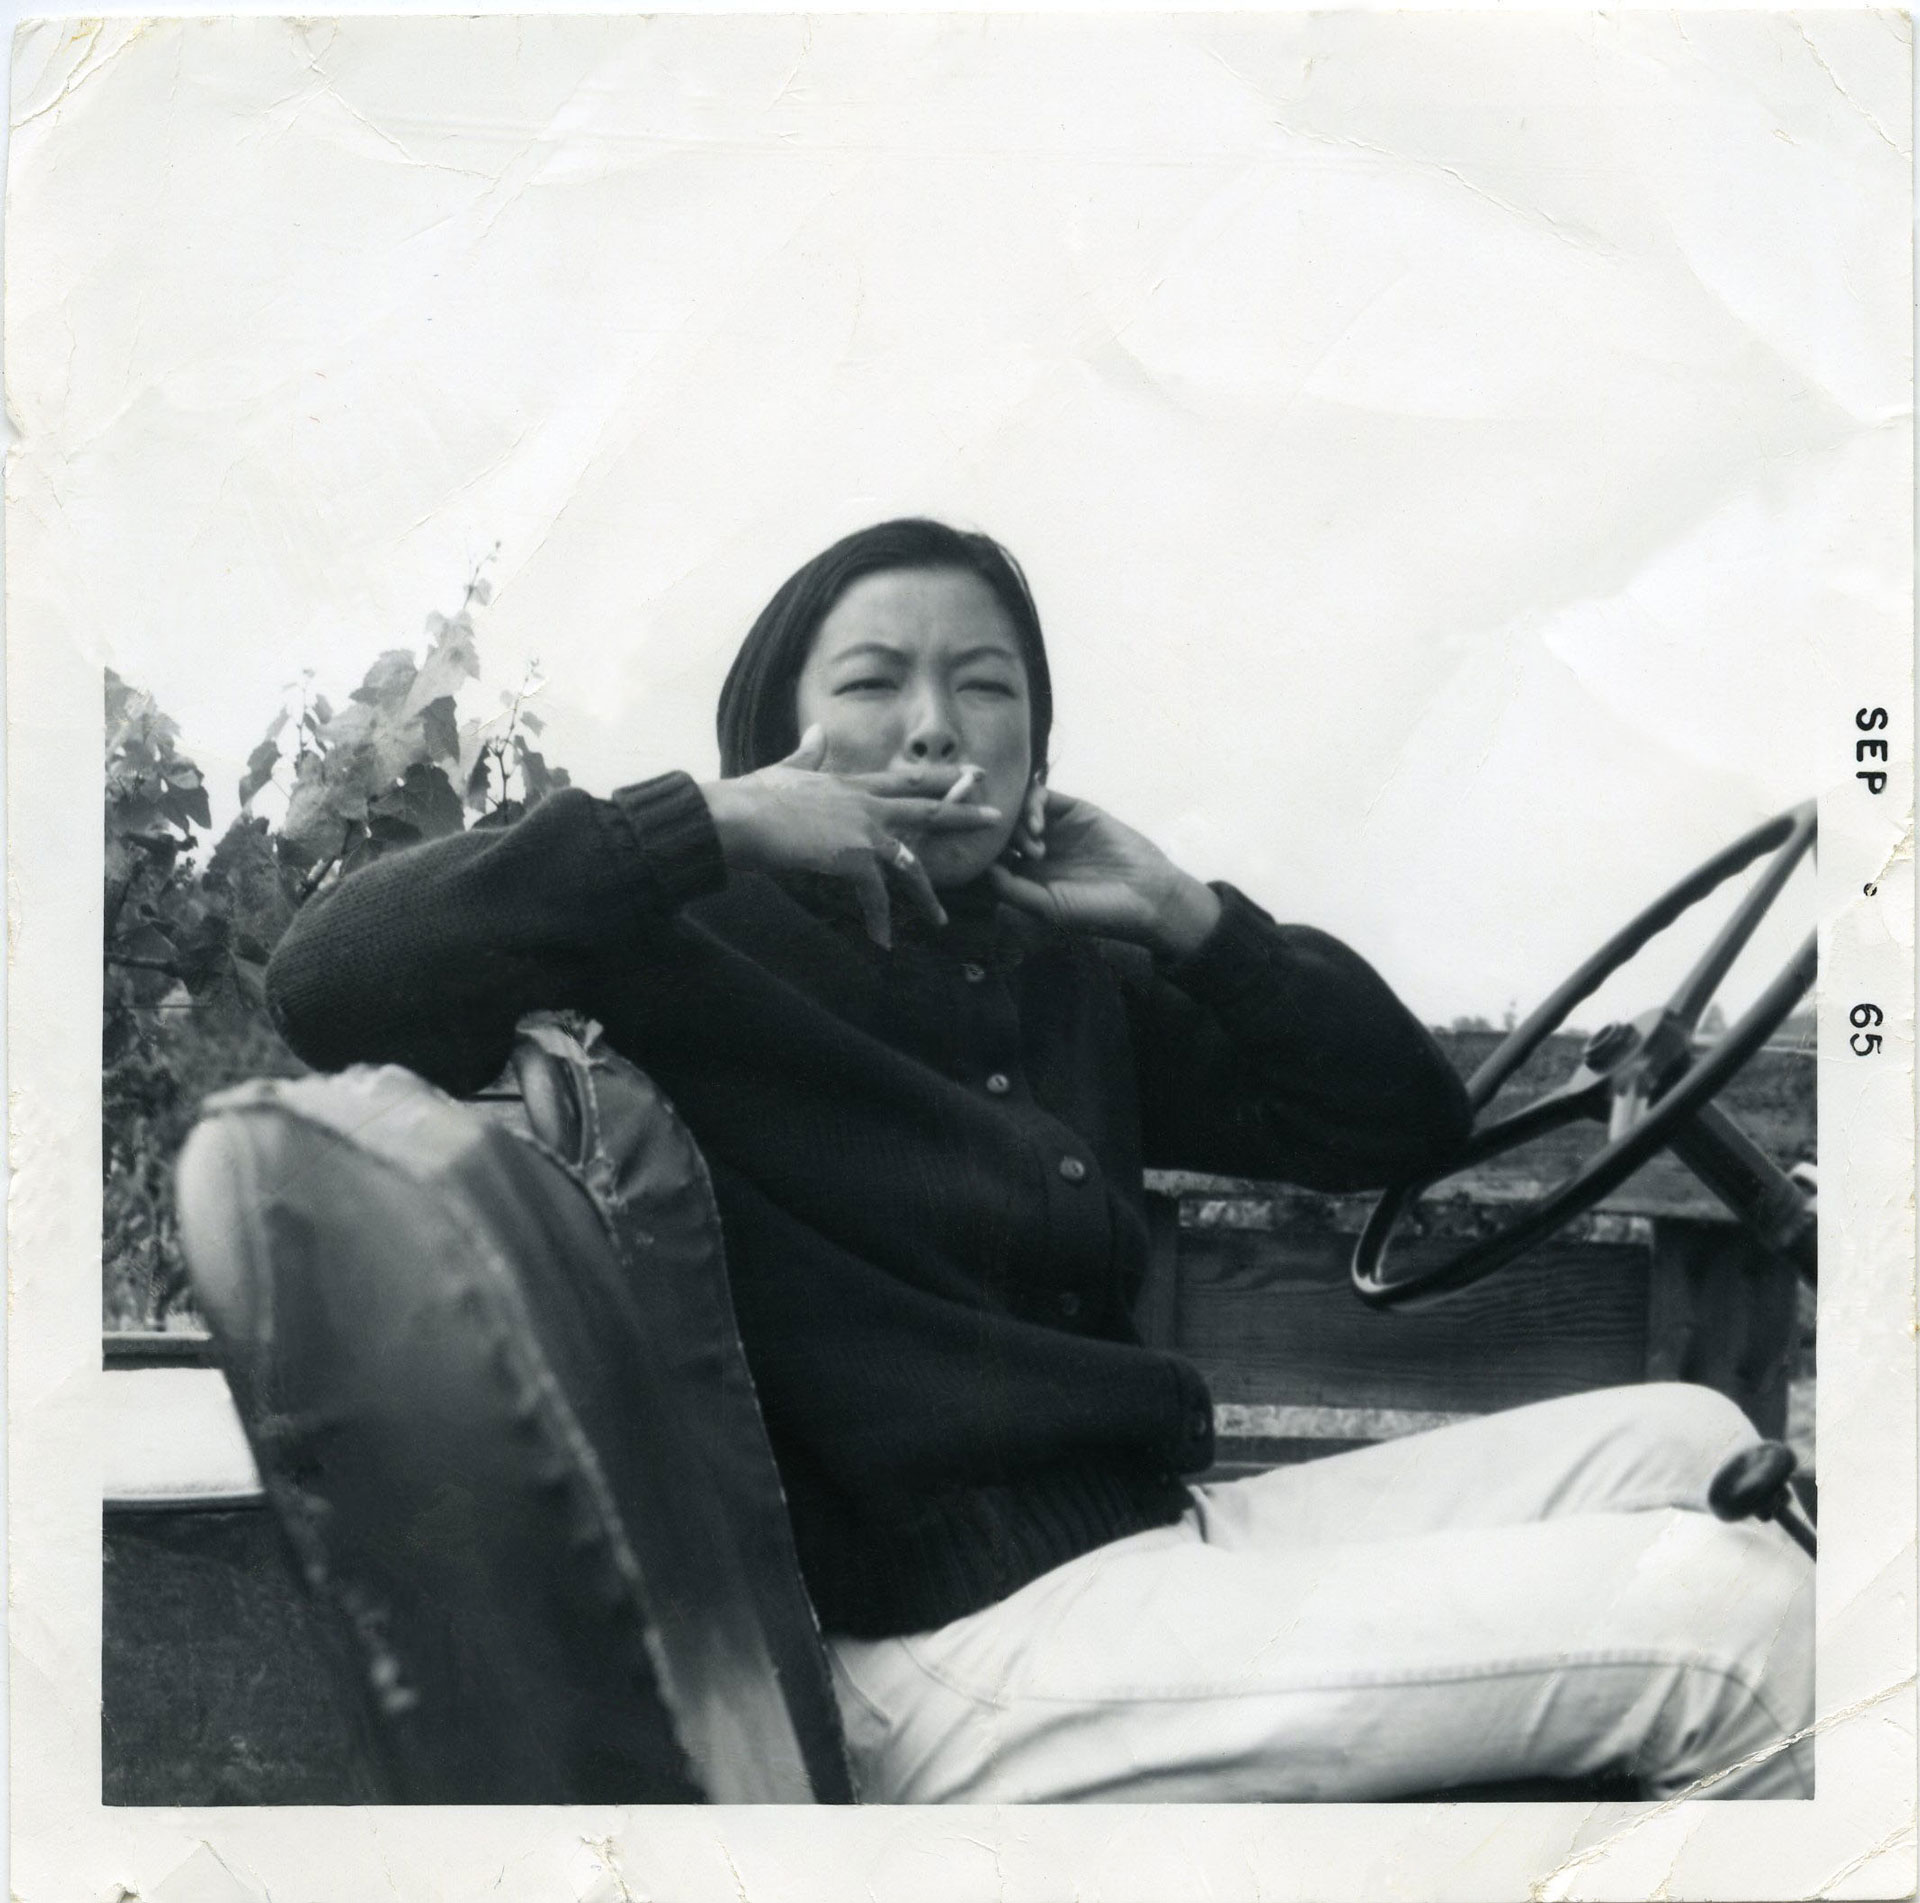 Black and white image of an Asian American woman smoking a cigarette in a car